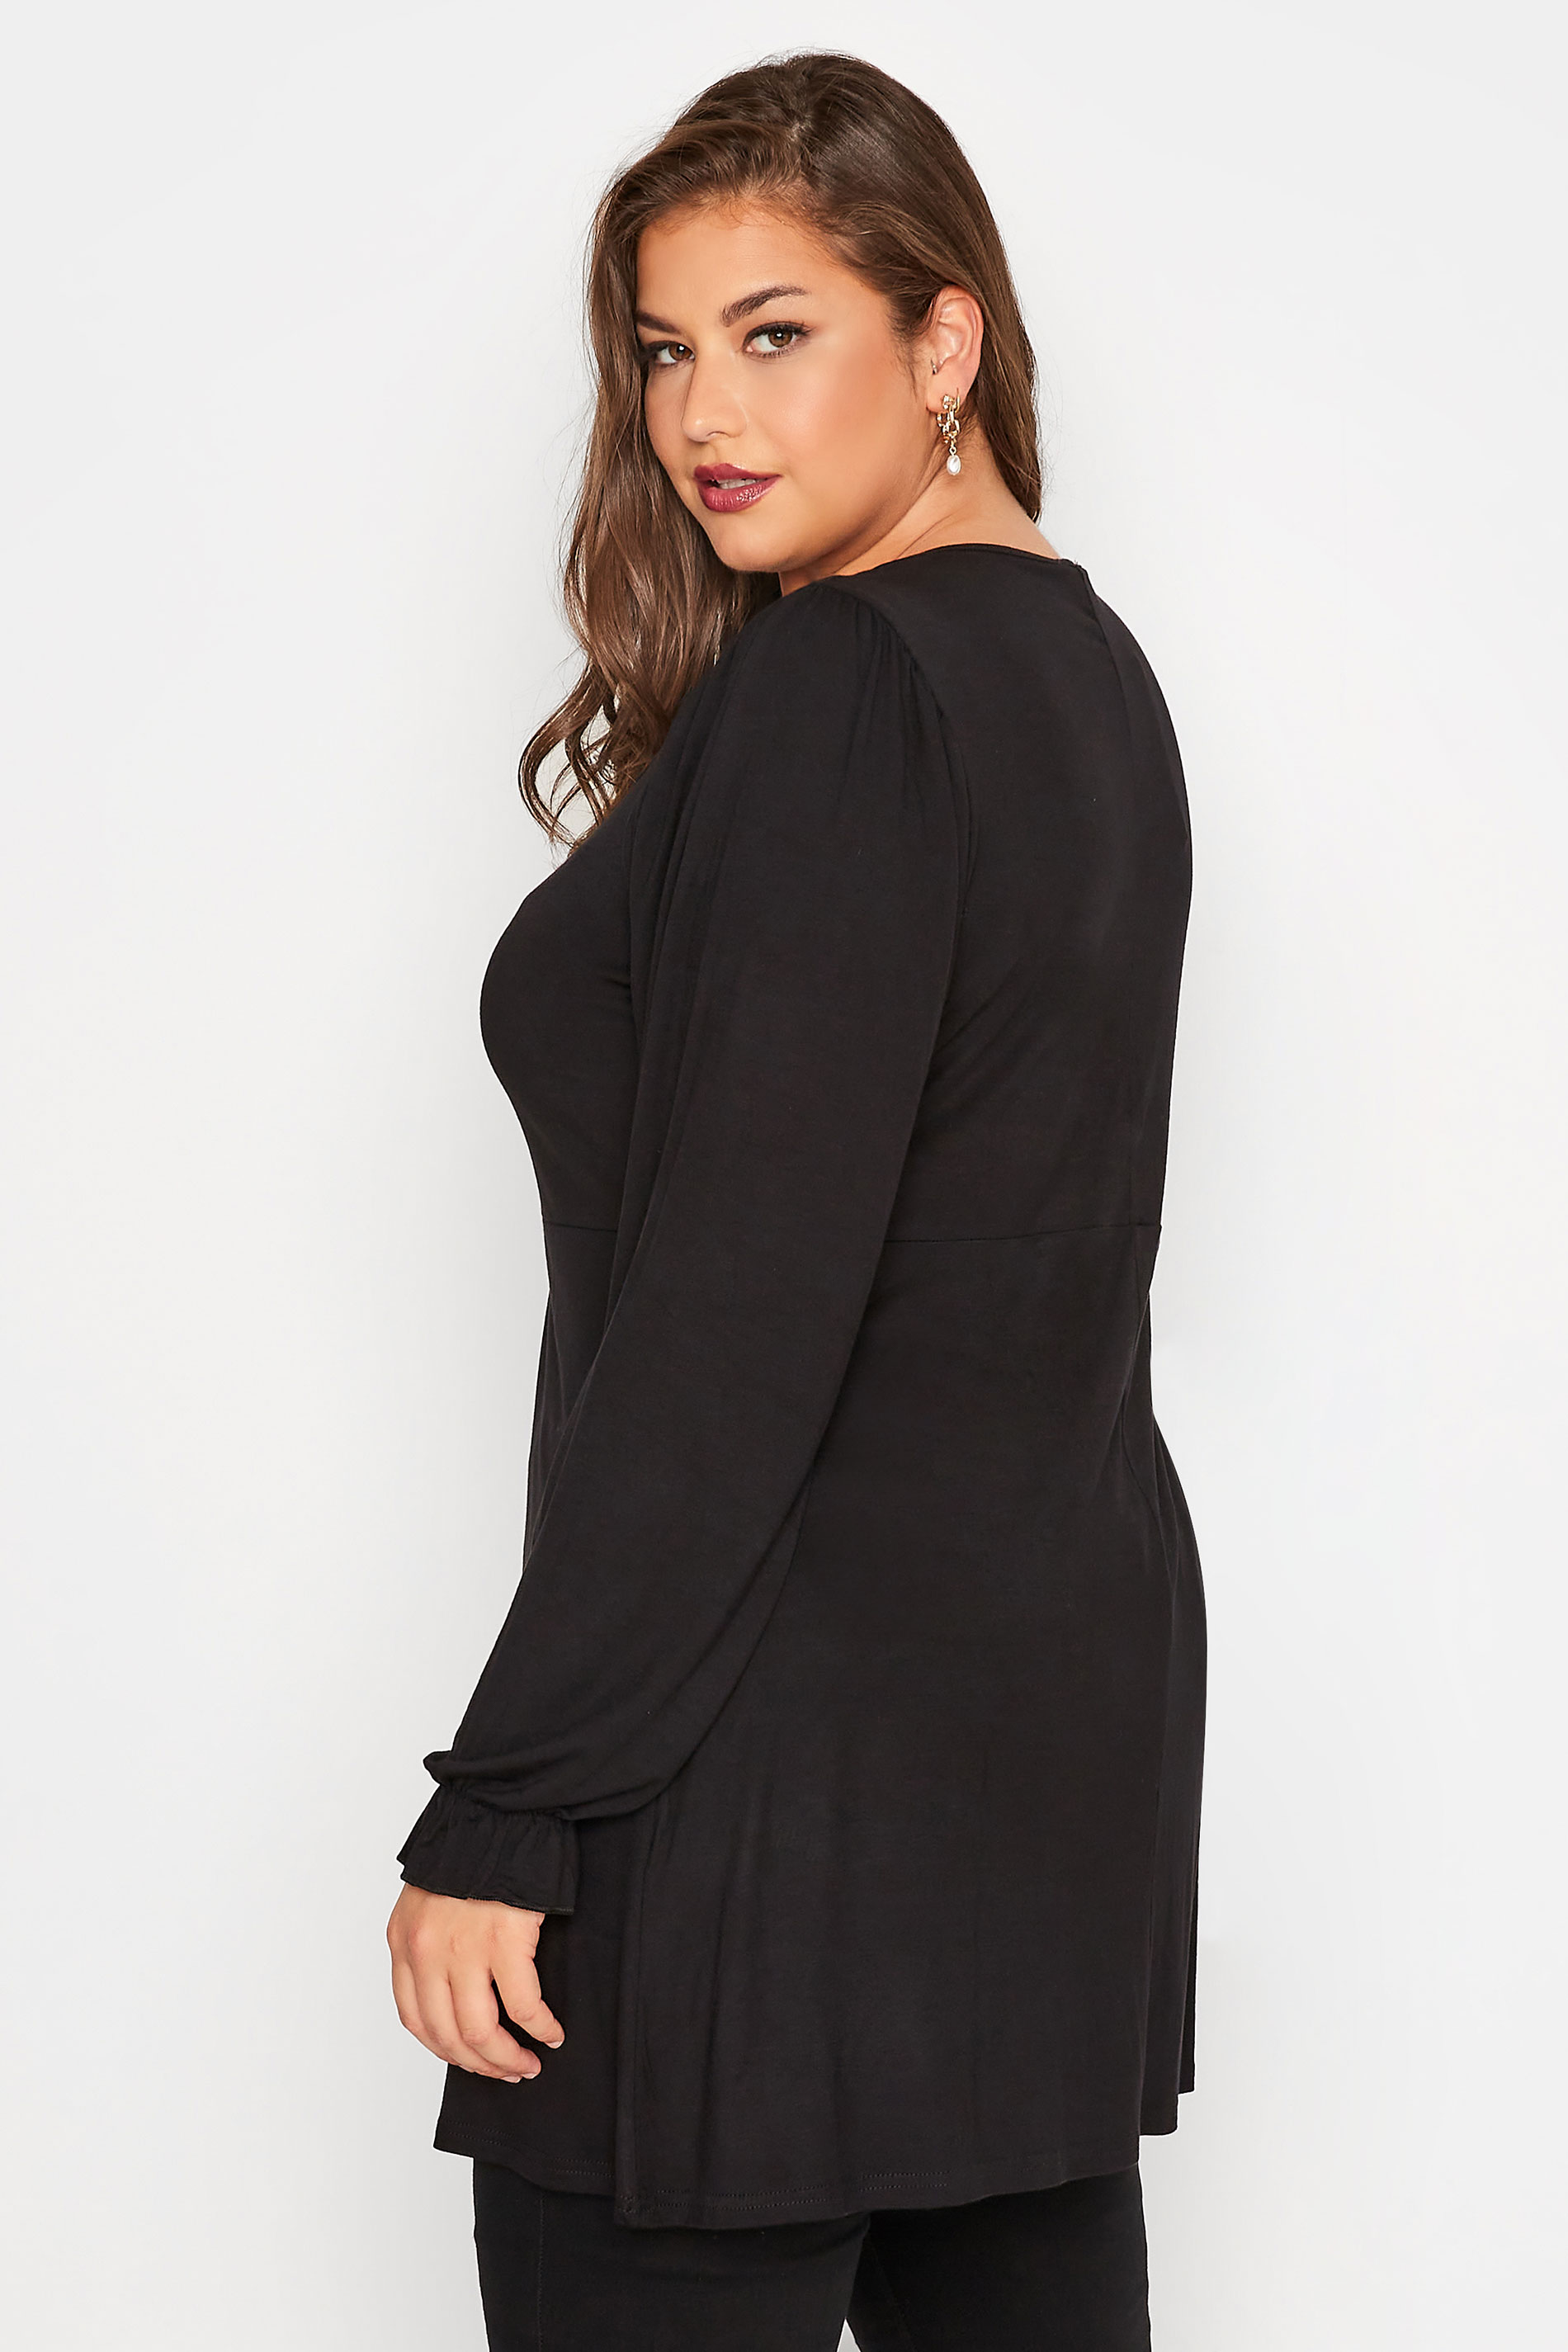 LIMITED COLLECTION Plus Size Black Ruched Top | Yours Clothing 3